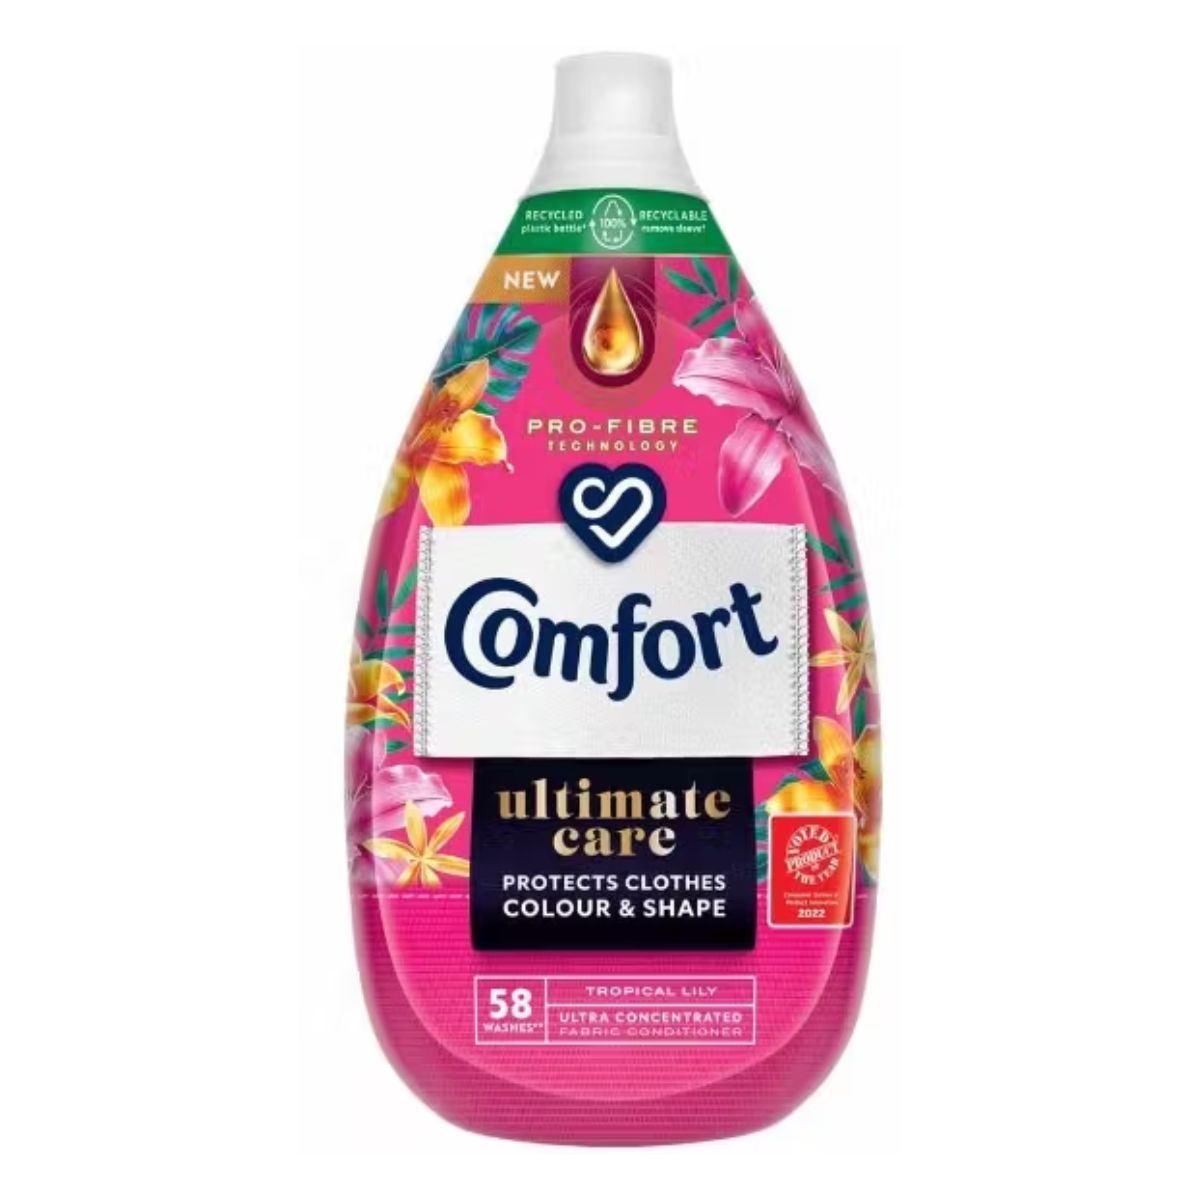 A bottle of Comfort - Ultimate Care Fabric Conditioner Tropical Lily 58 Washes - 850ml, labeled as ultra-concentrated and safeguarding clothes' color and shape.